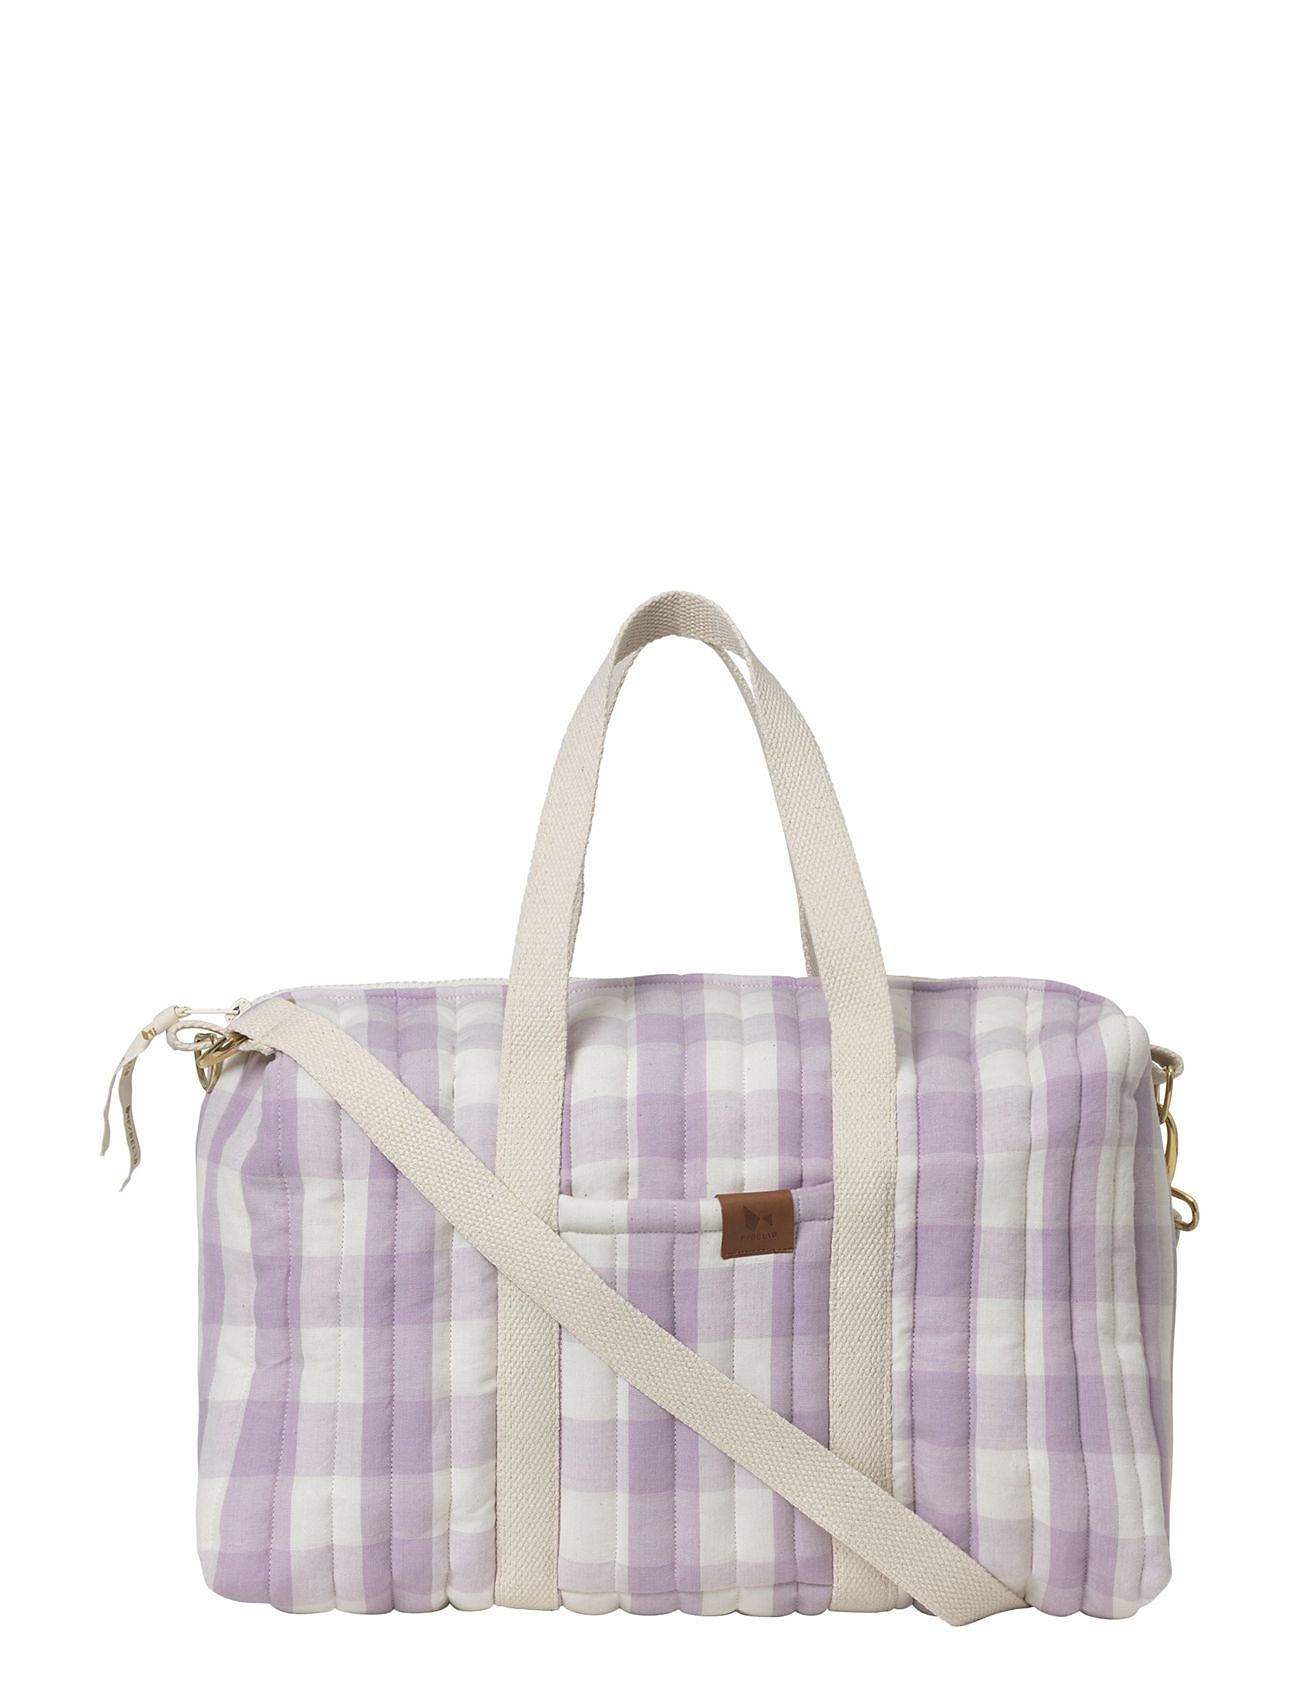 Quilted Gym Bag - Lilac Checks Accessories Bags Sports Bags Purple Fabelab